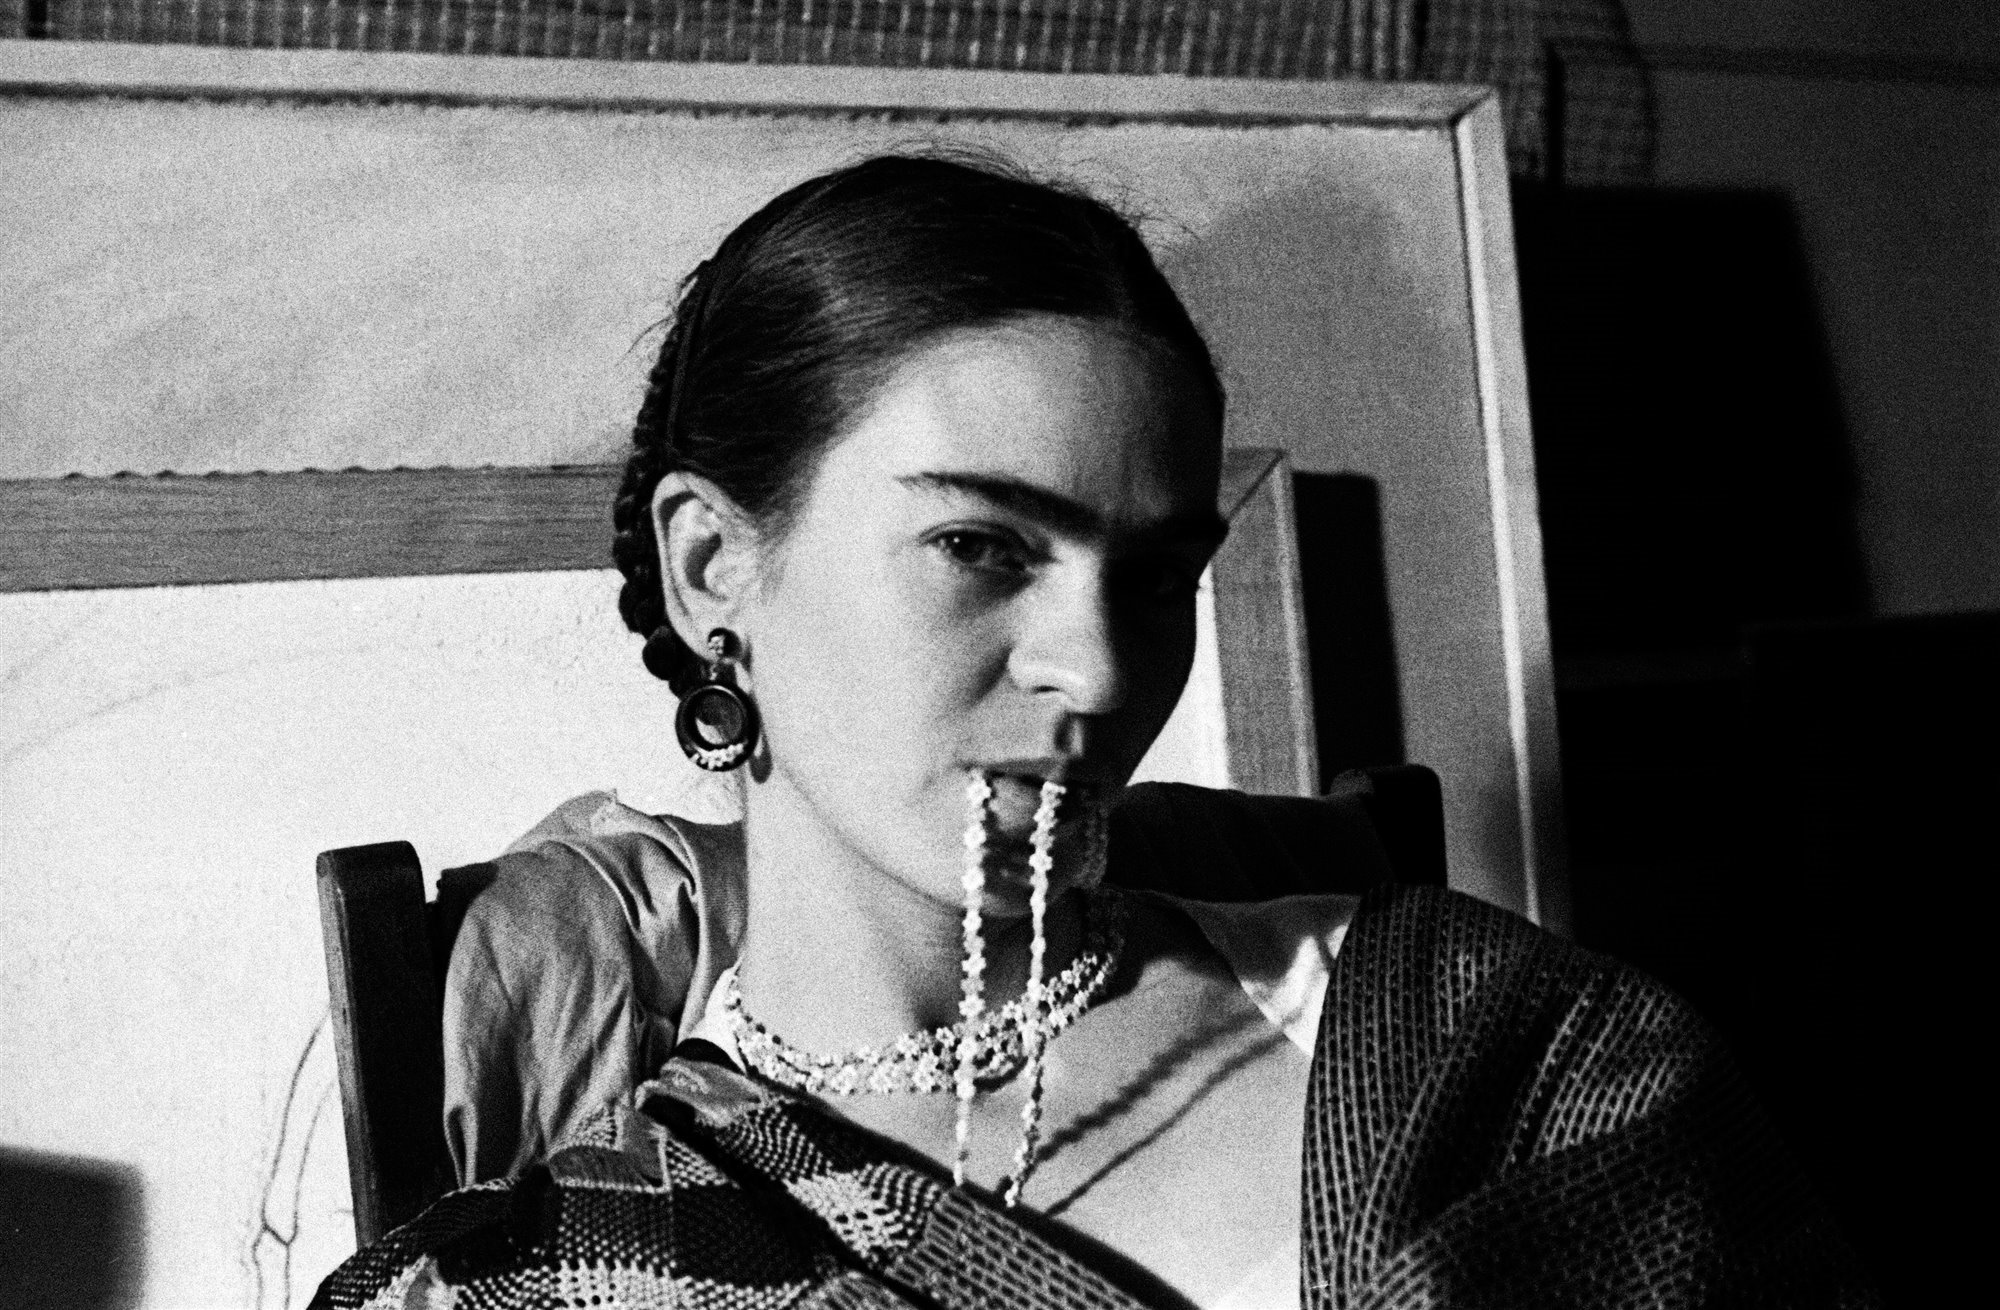 Frida Biting her Necklace, New Workers School, NYC, 1933